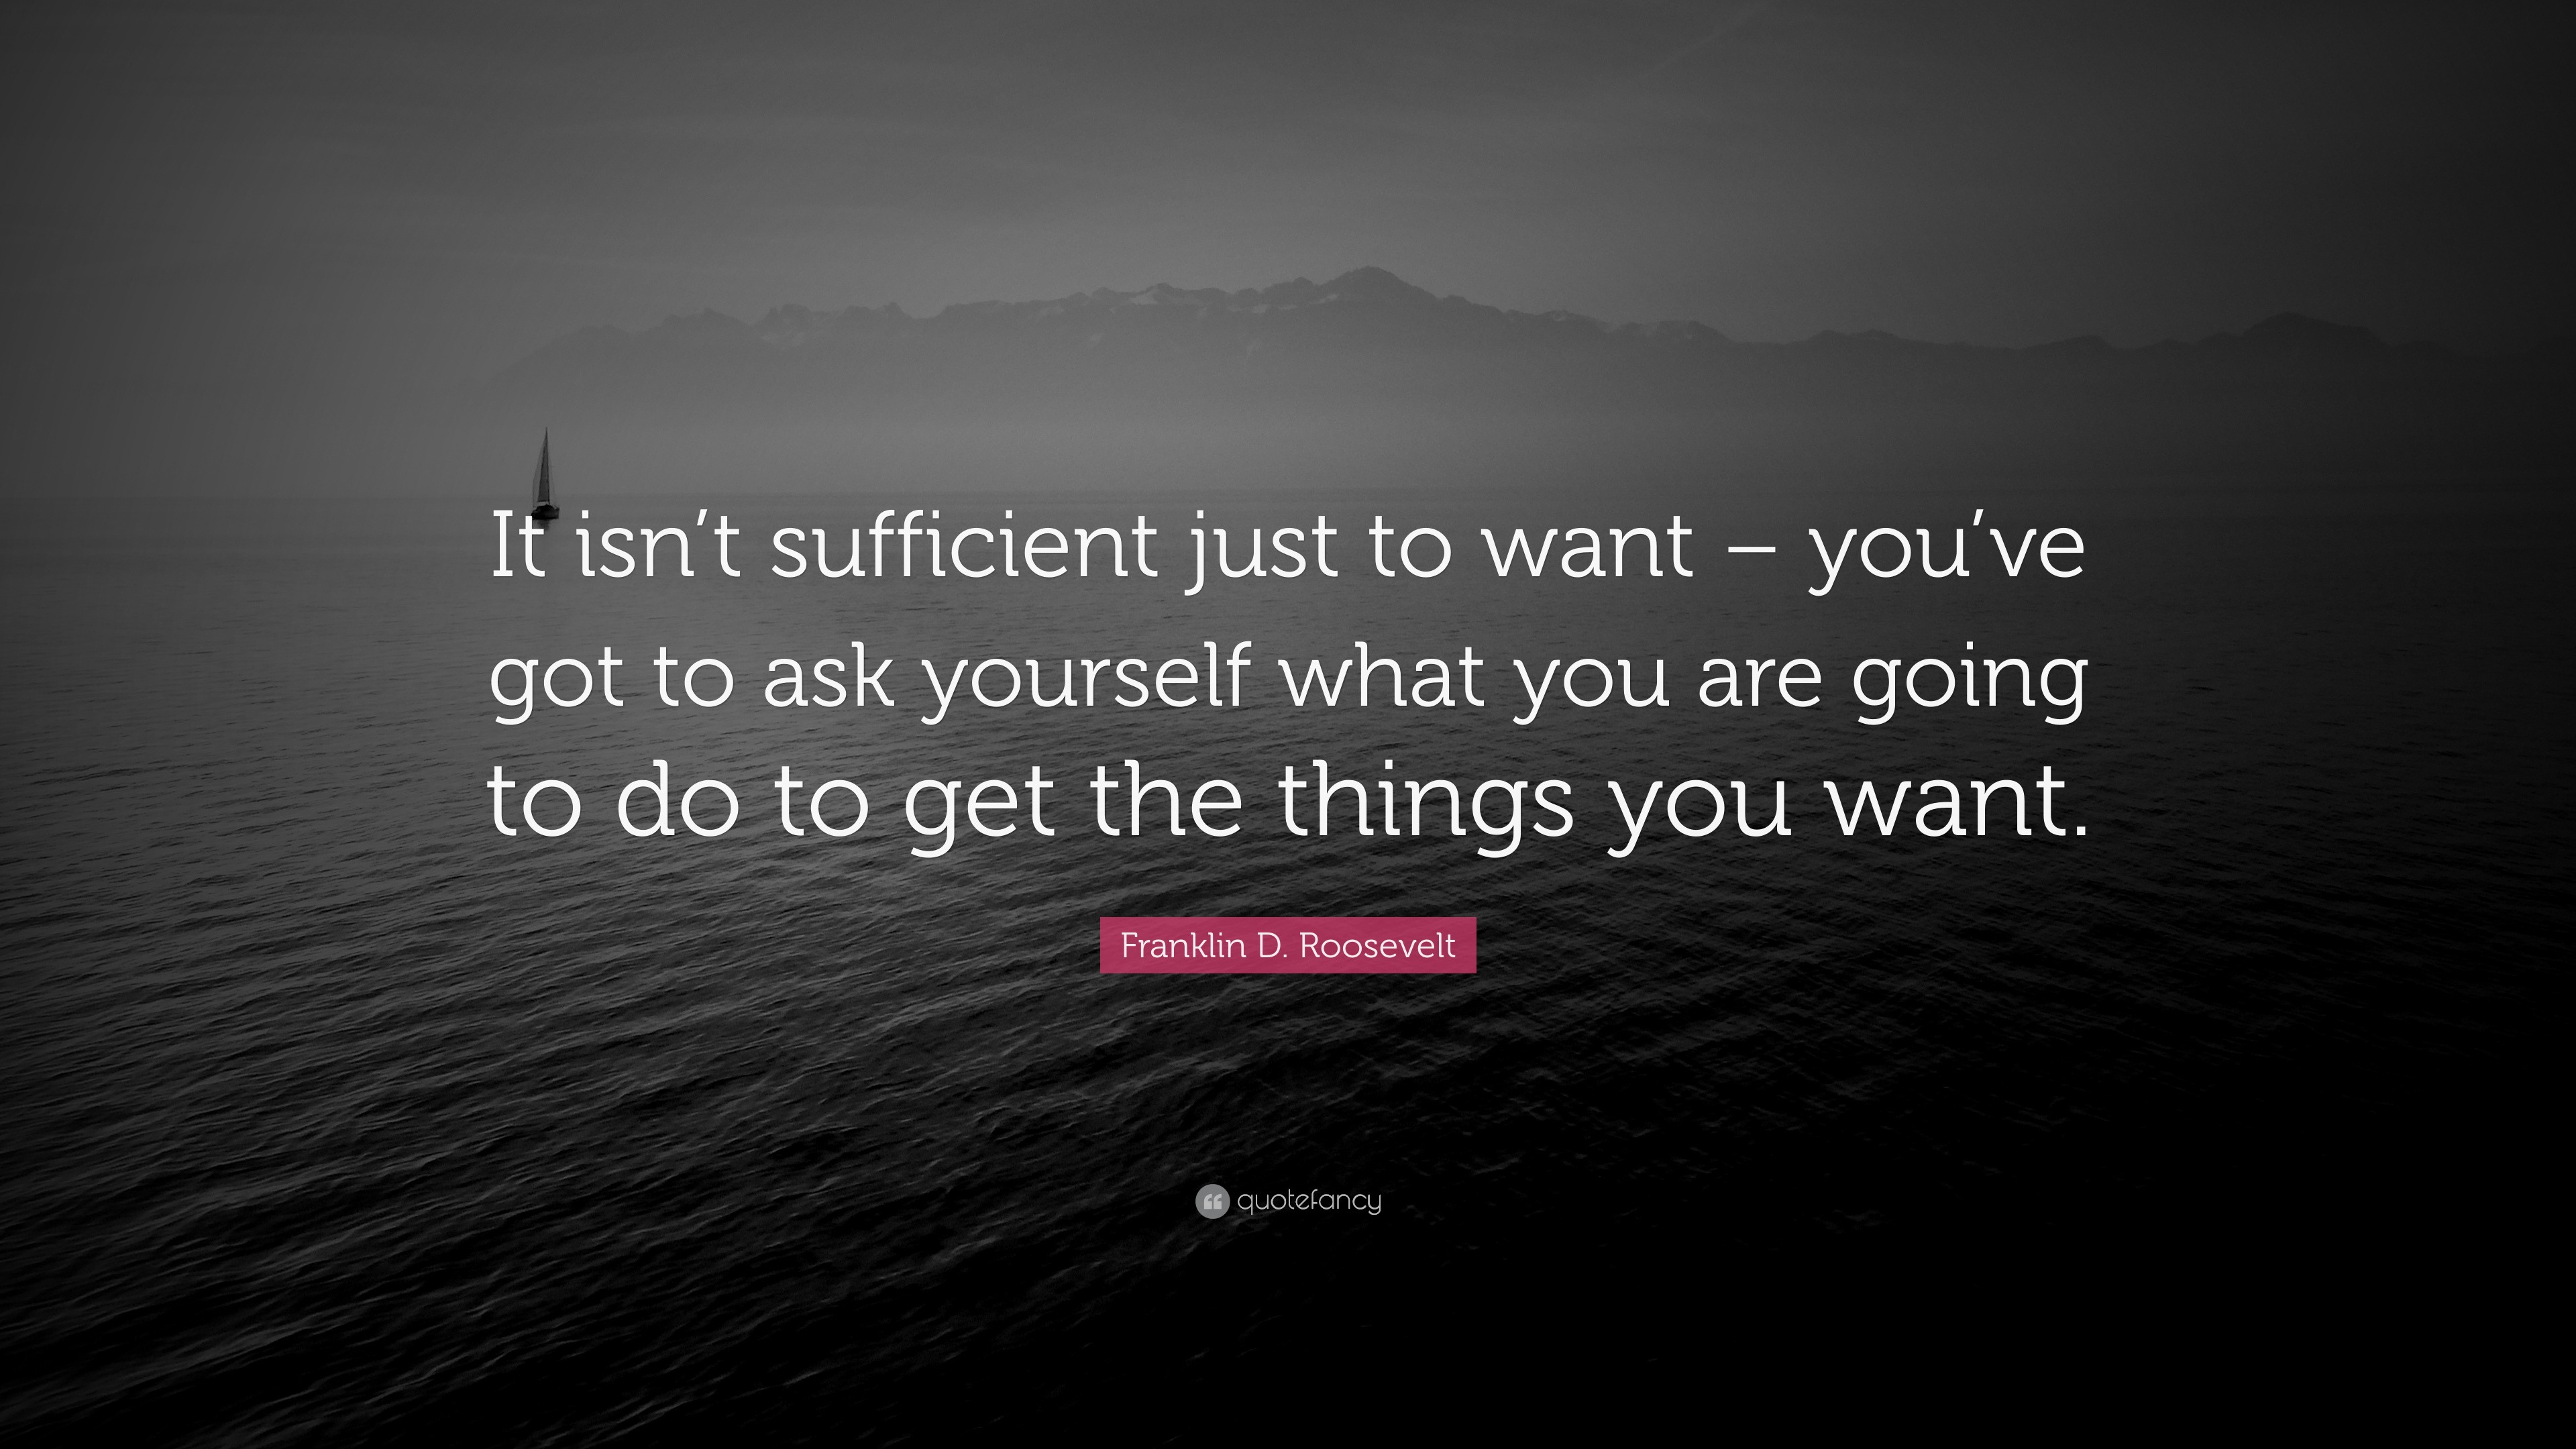 Franklin D Roosevelt Quote “it Isnt Sufficient Just To Want Youve